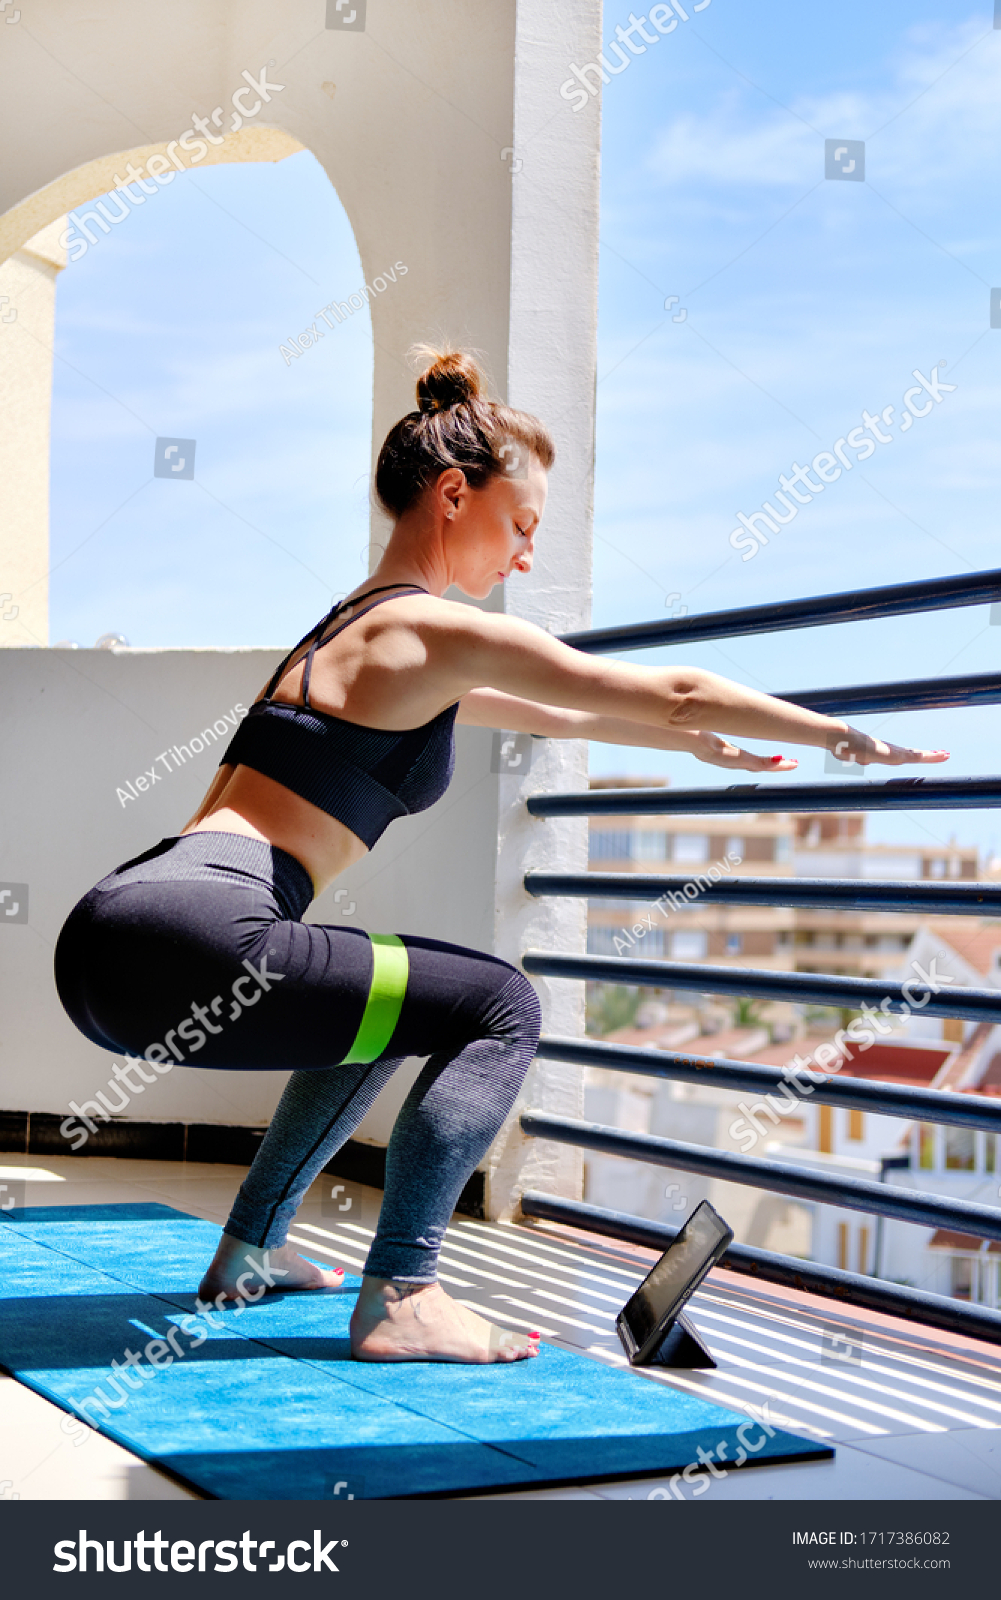 Work out at home due self-isolation COVID-19 corona virus pandemic concept. Woman in sportswear standing barefoot on mat perform squats with elastic band use tablet device video online lesson concept #1717386082